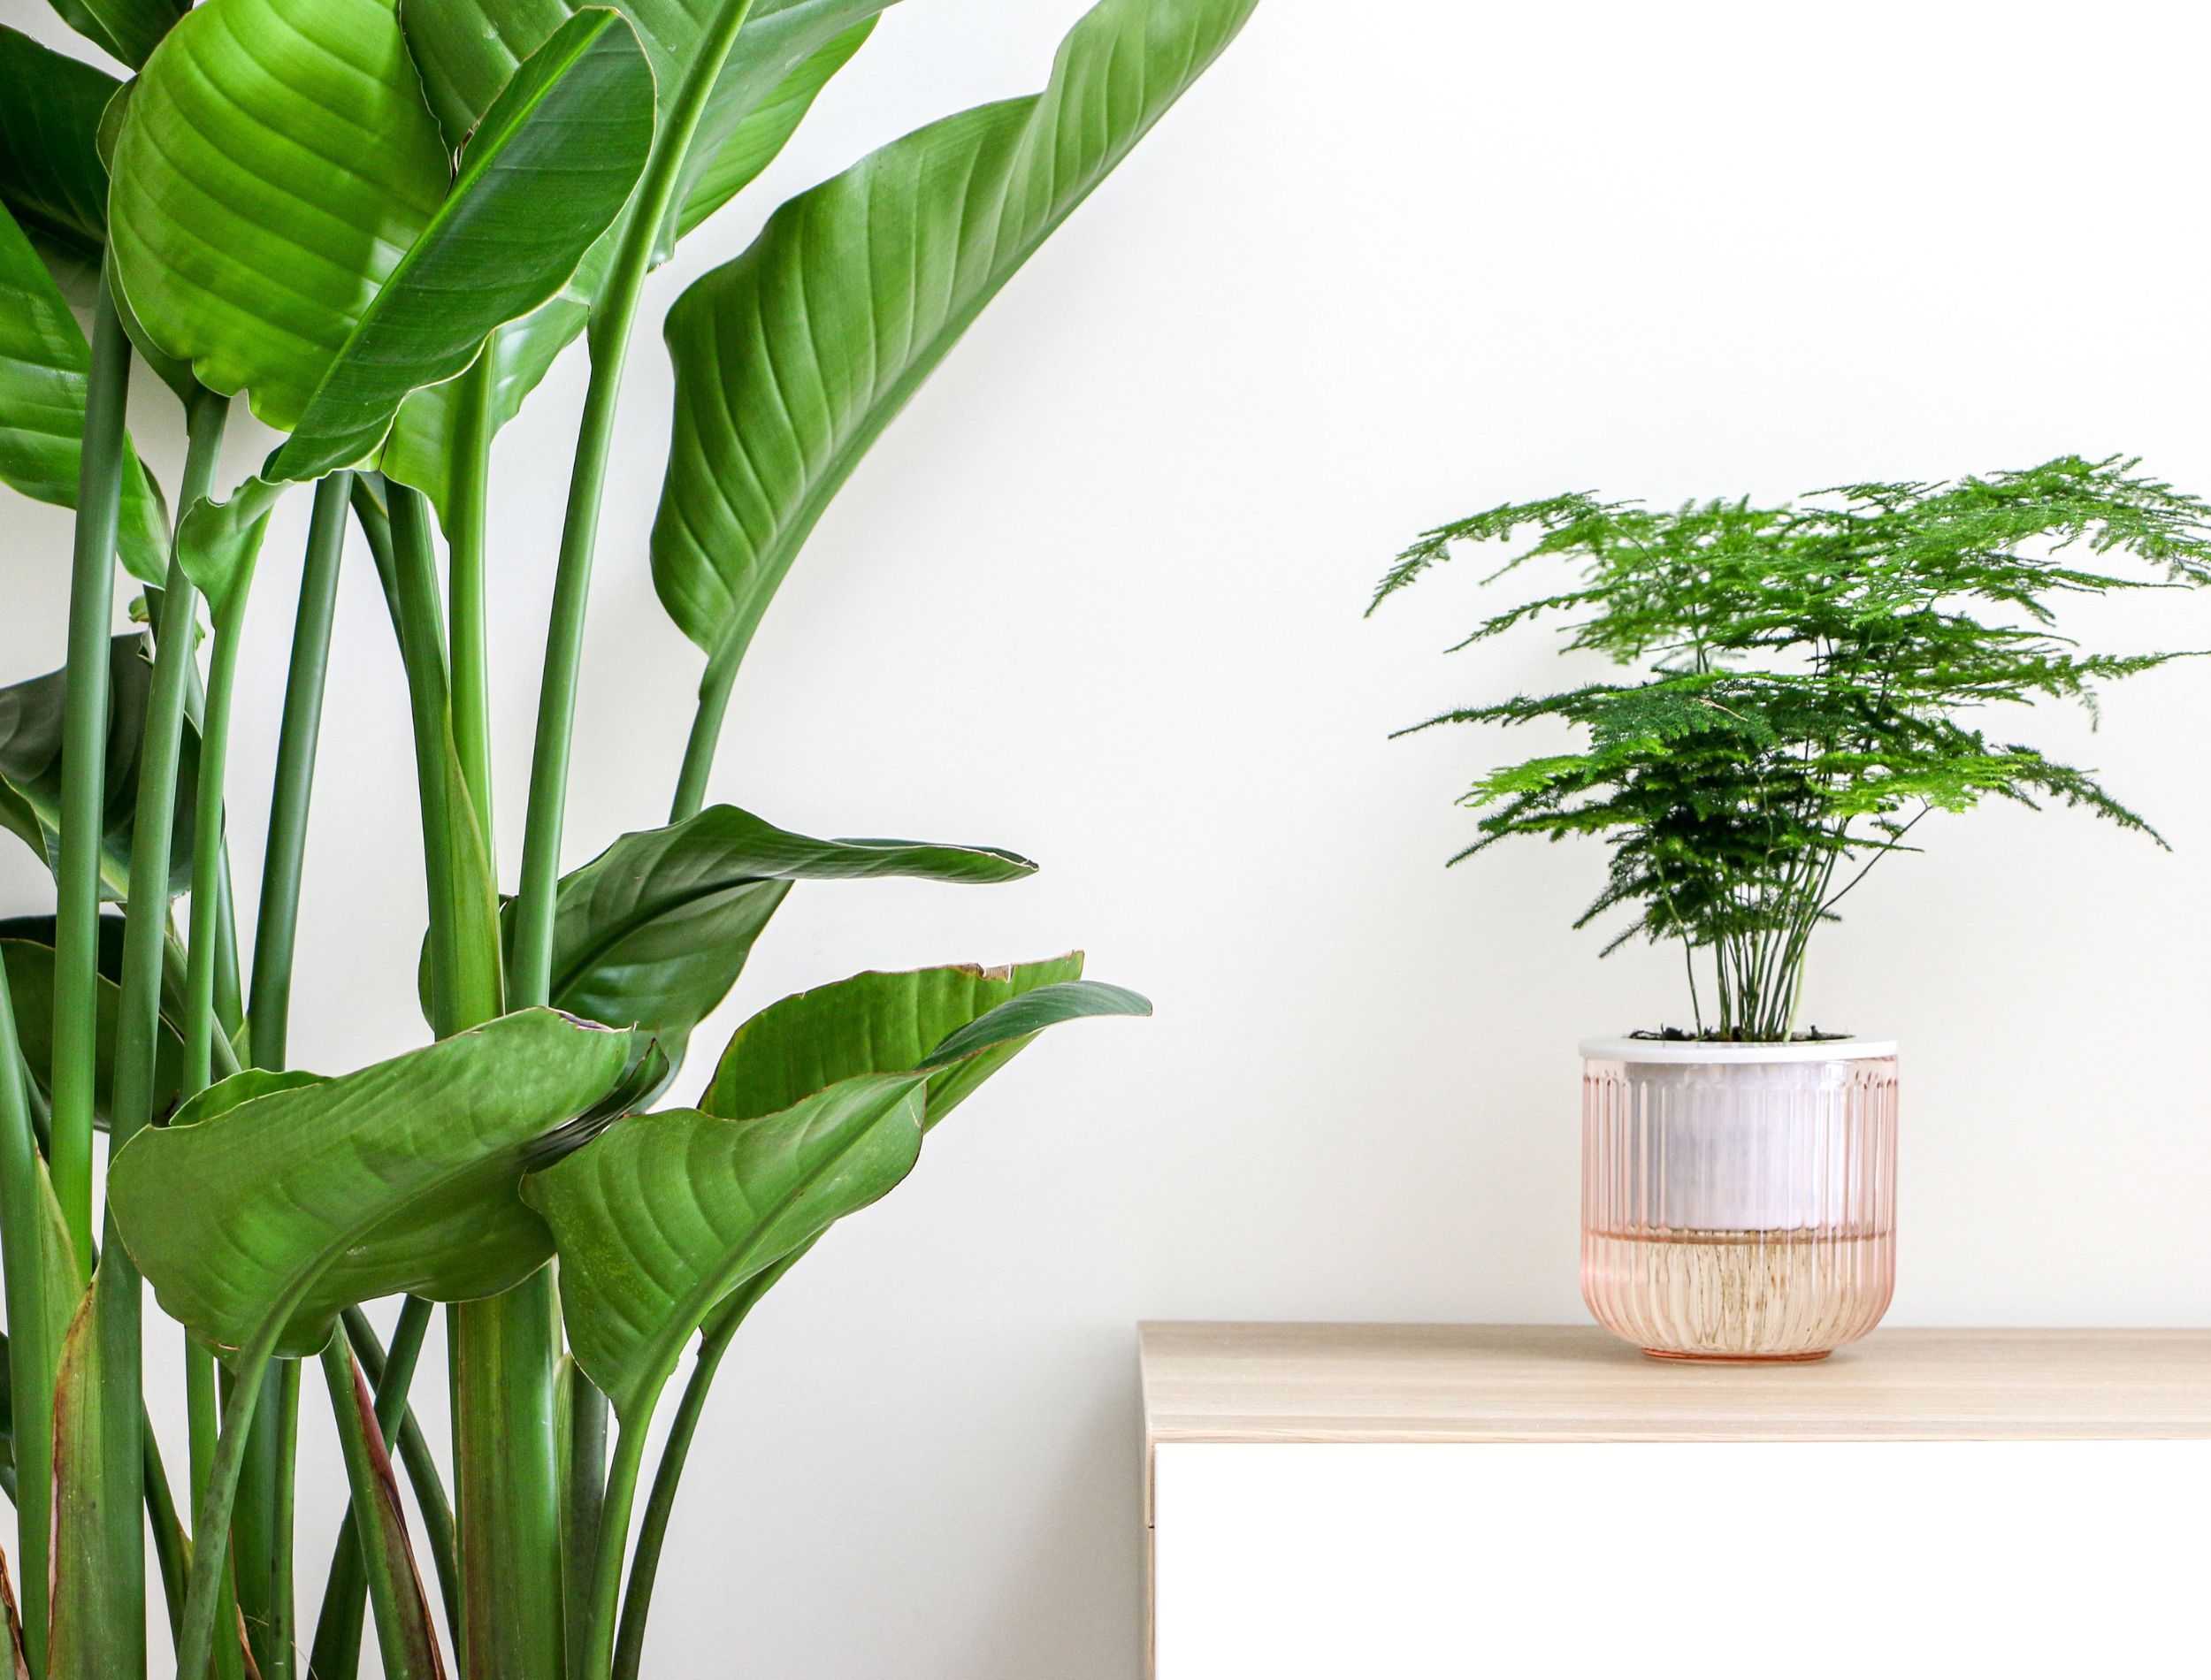 Asparagus fern indoors next to houseplants